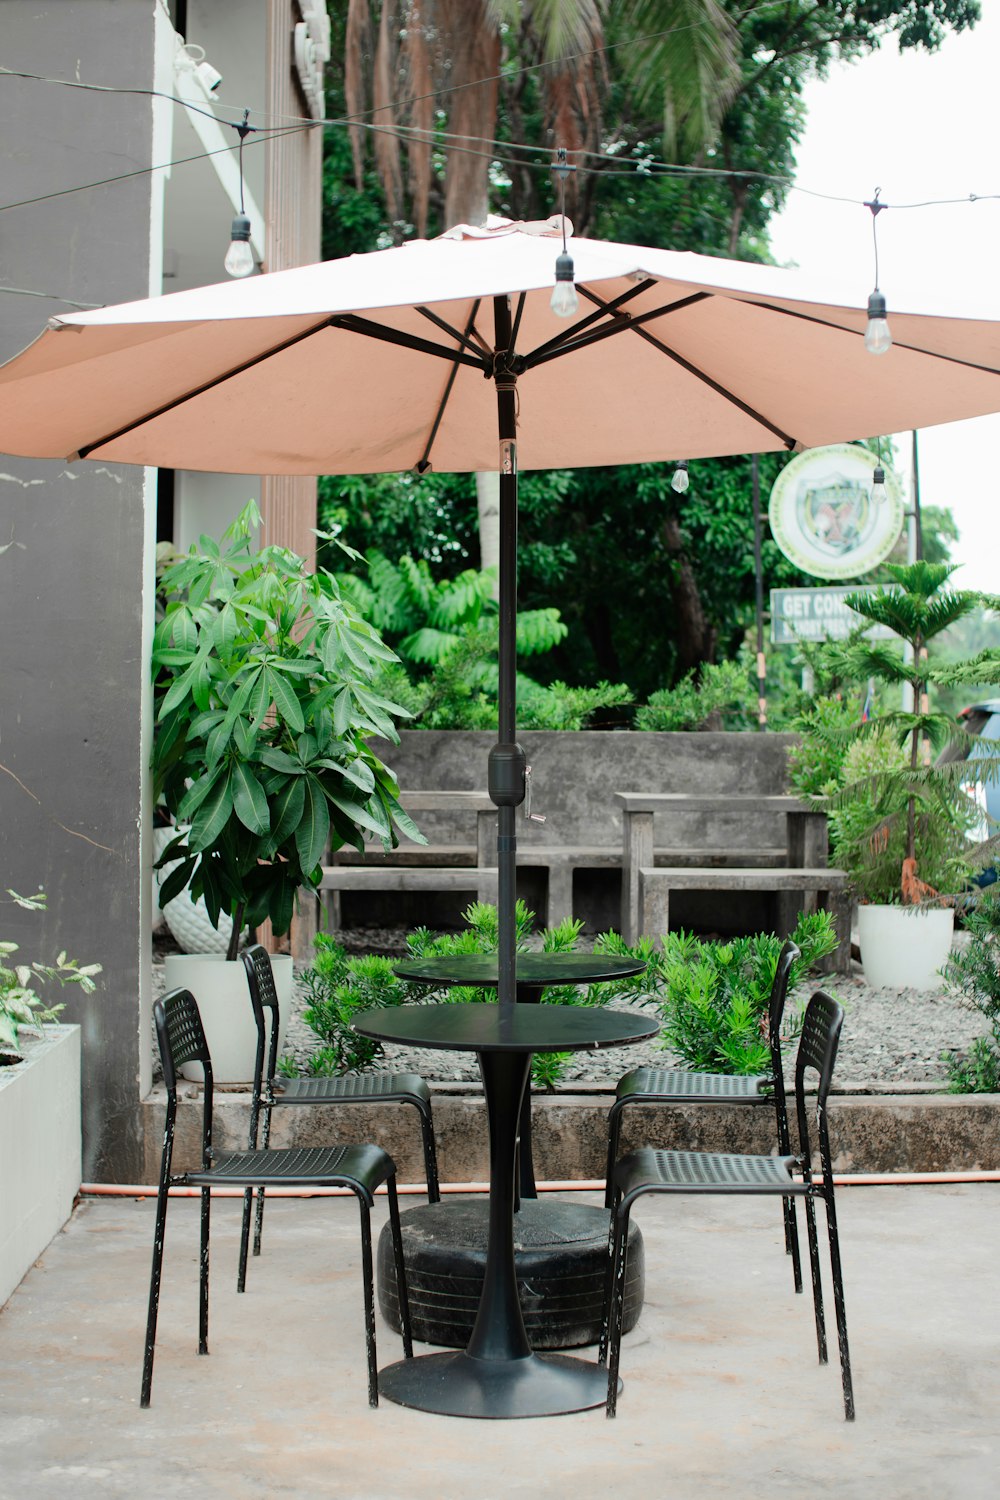 a table and chairs under an umbrella on a patio